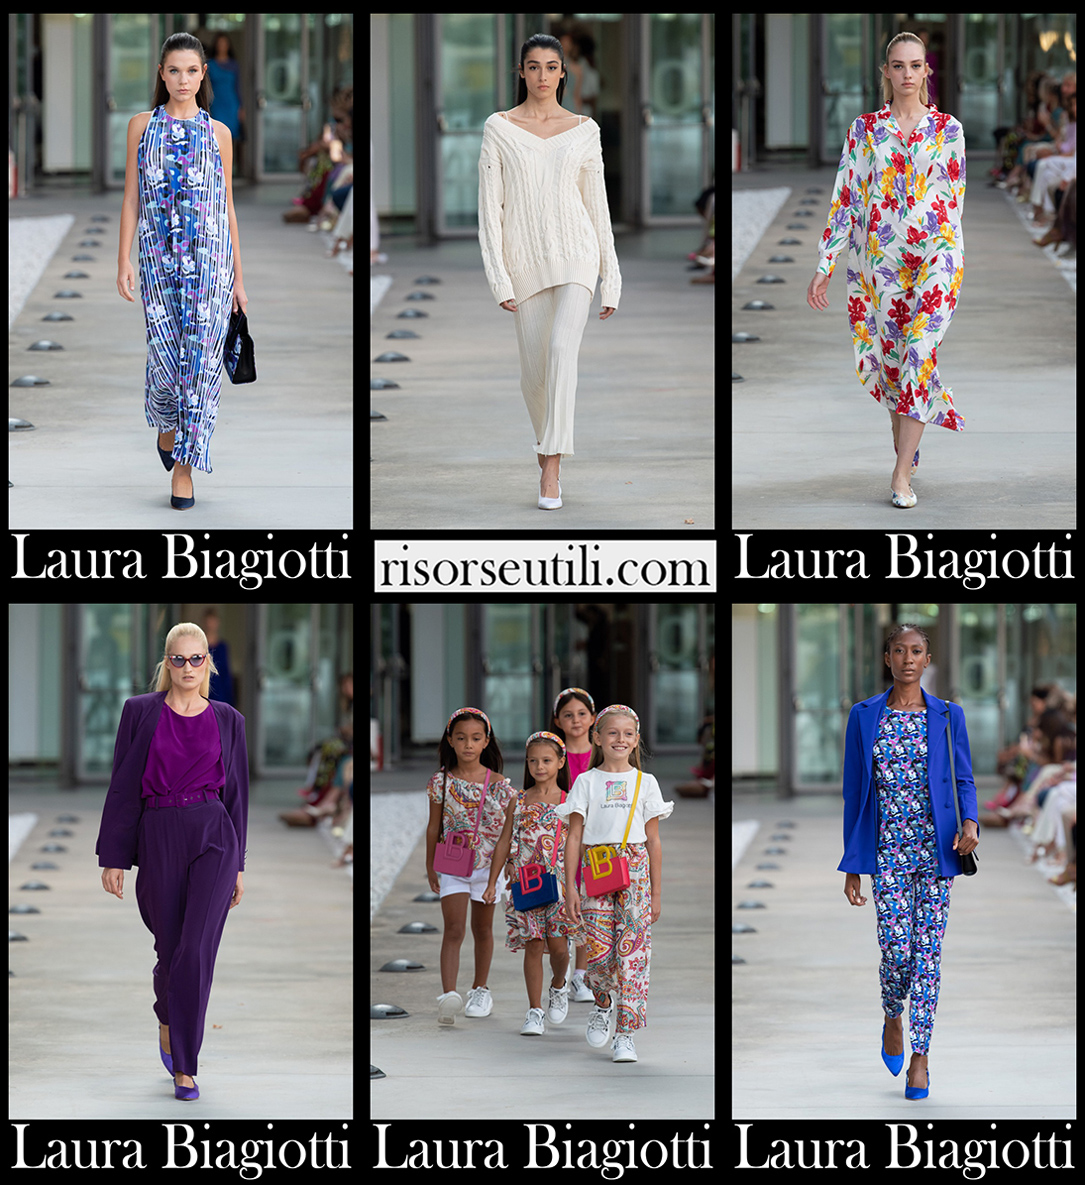 Laura Biagiotti spring summer 2022 fashion collection